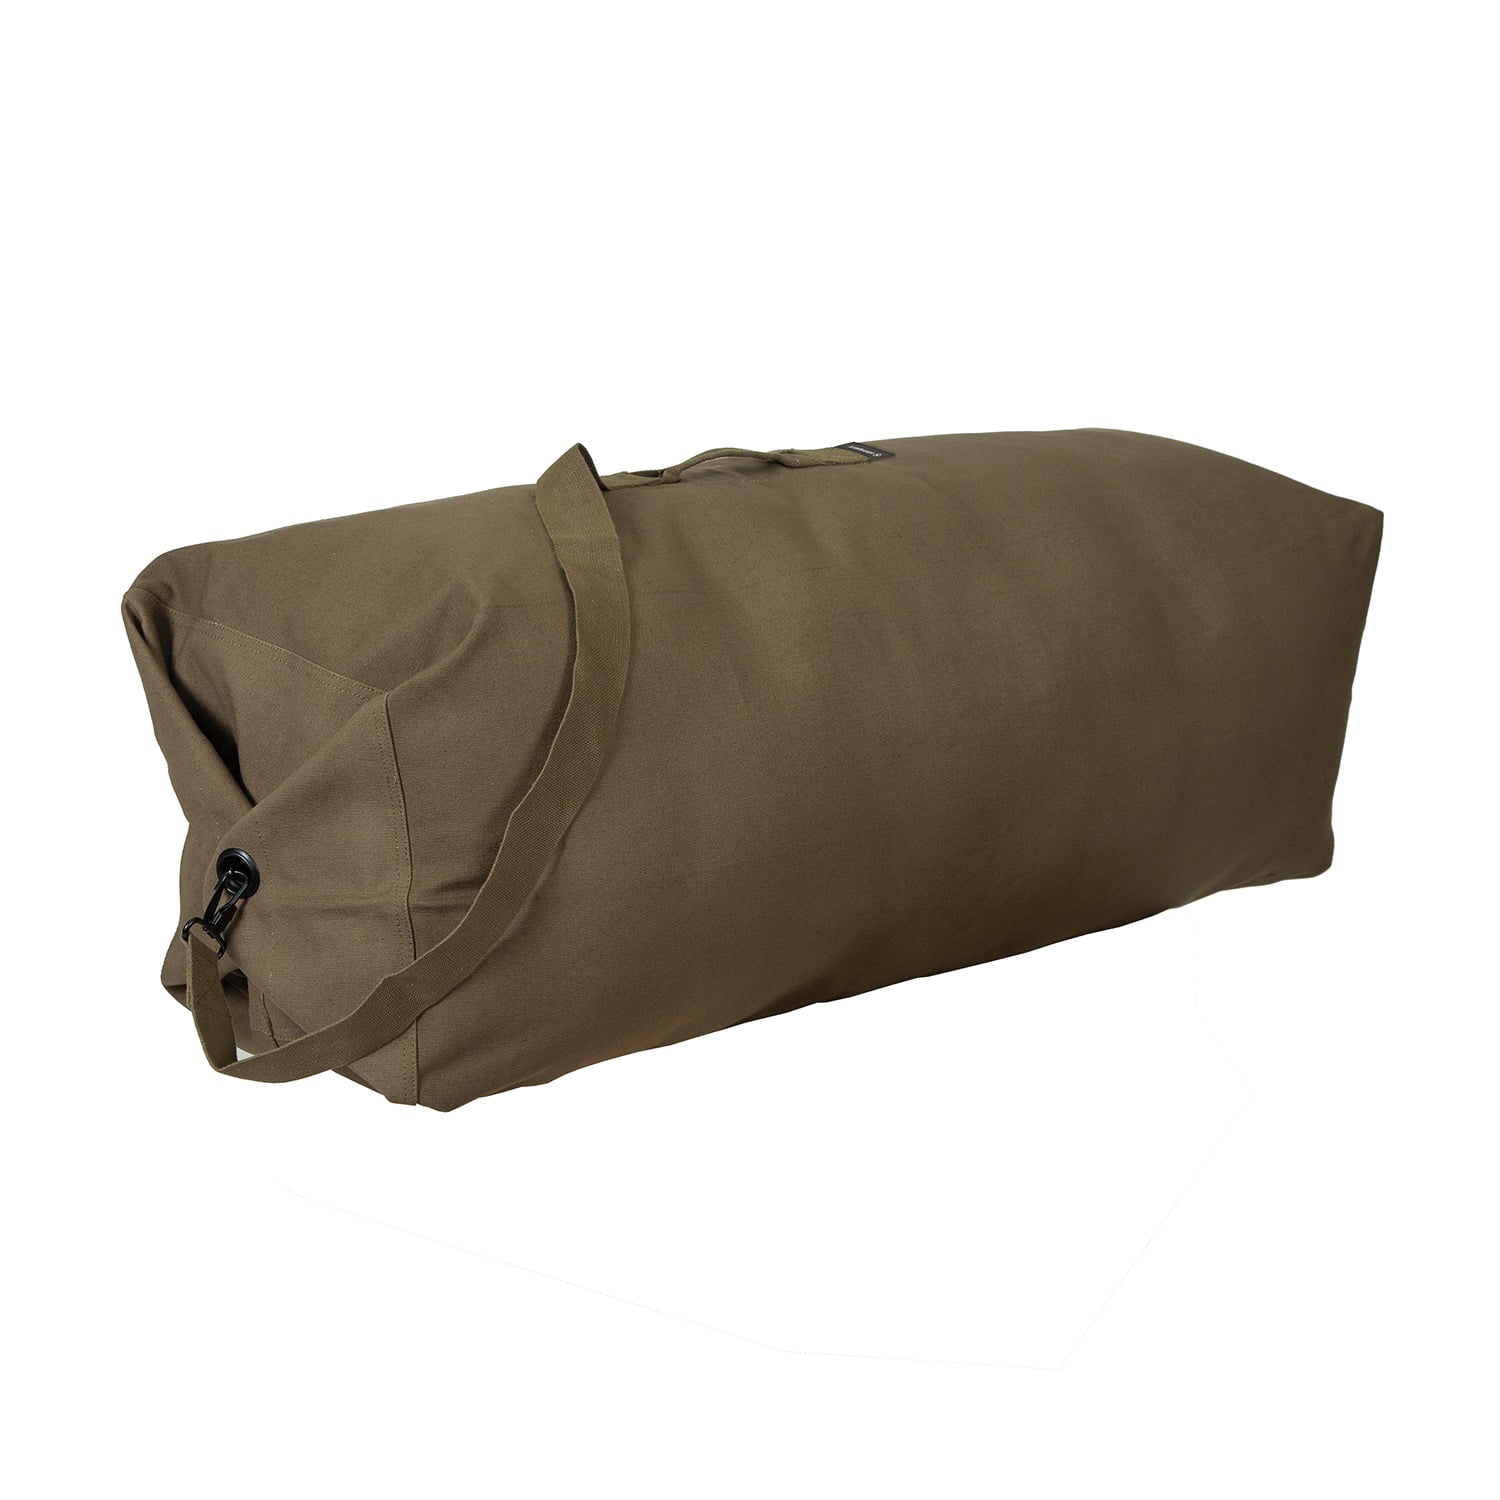 Stansport 1205 50-Inch Top-Load Canvas Deluxe Duffel Bag (Olive Drab ...